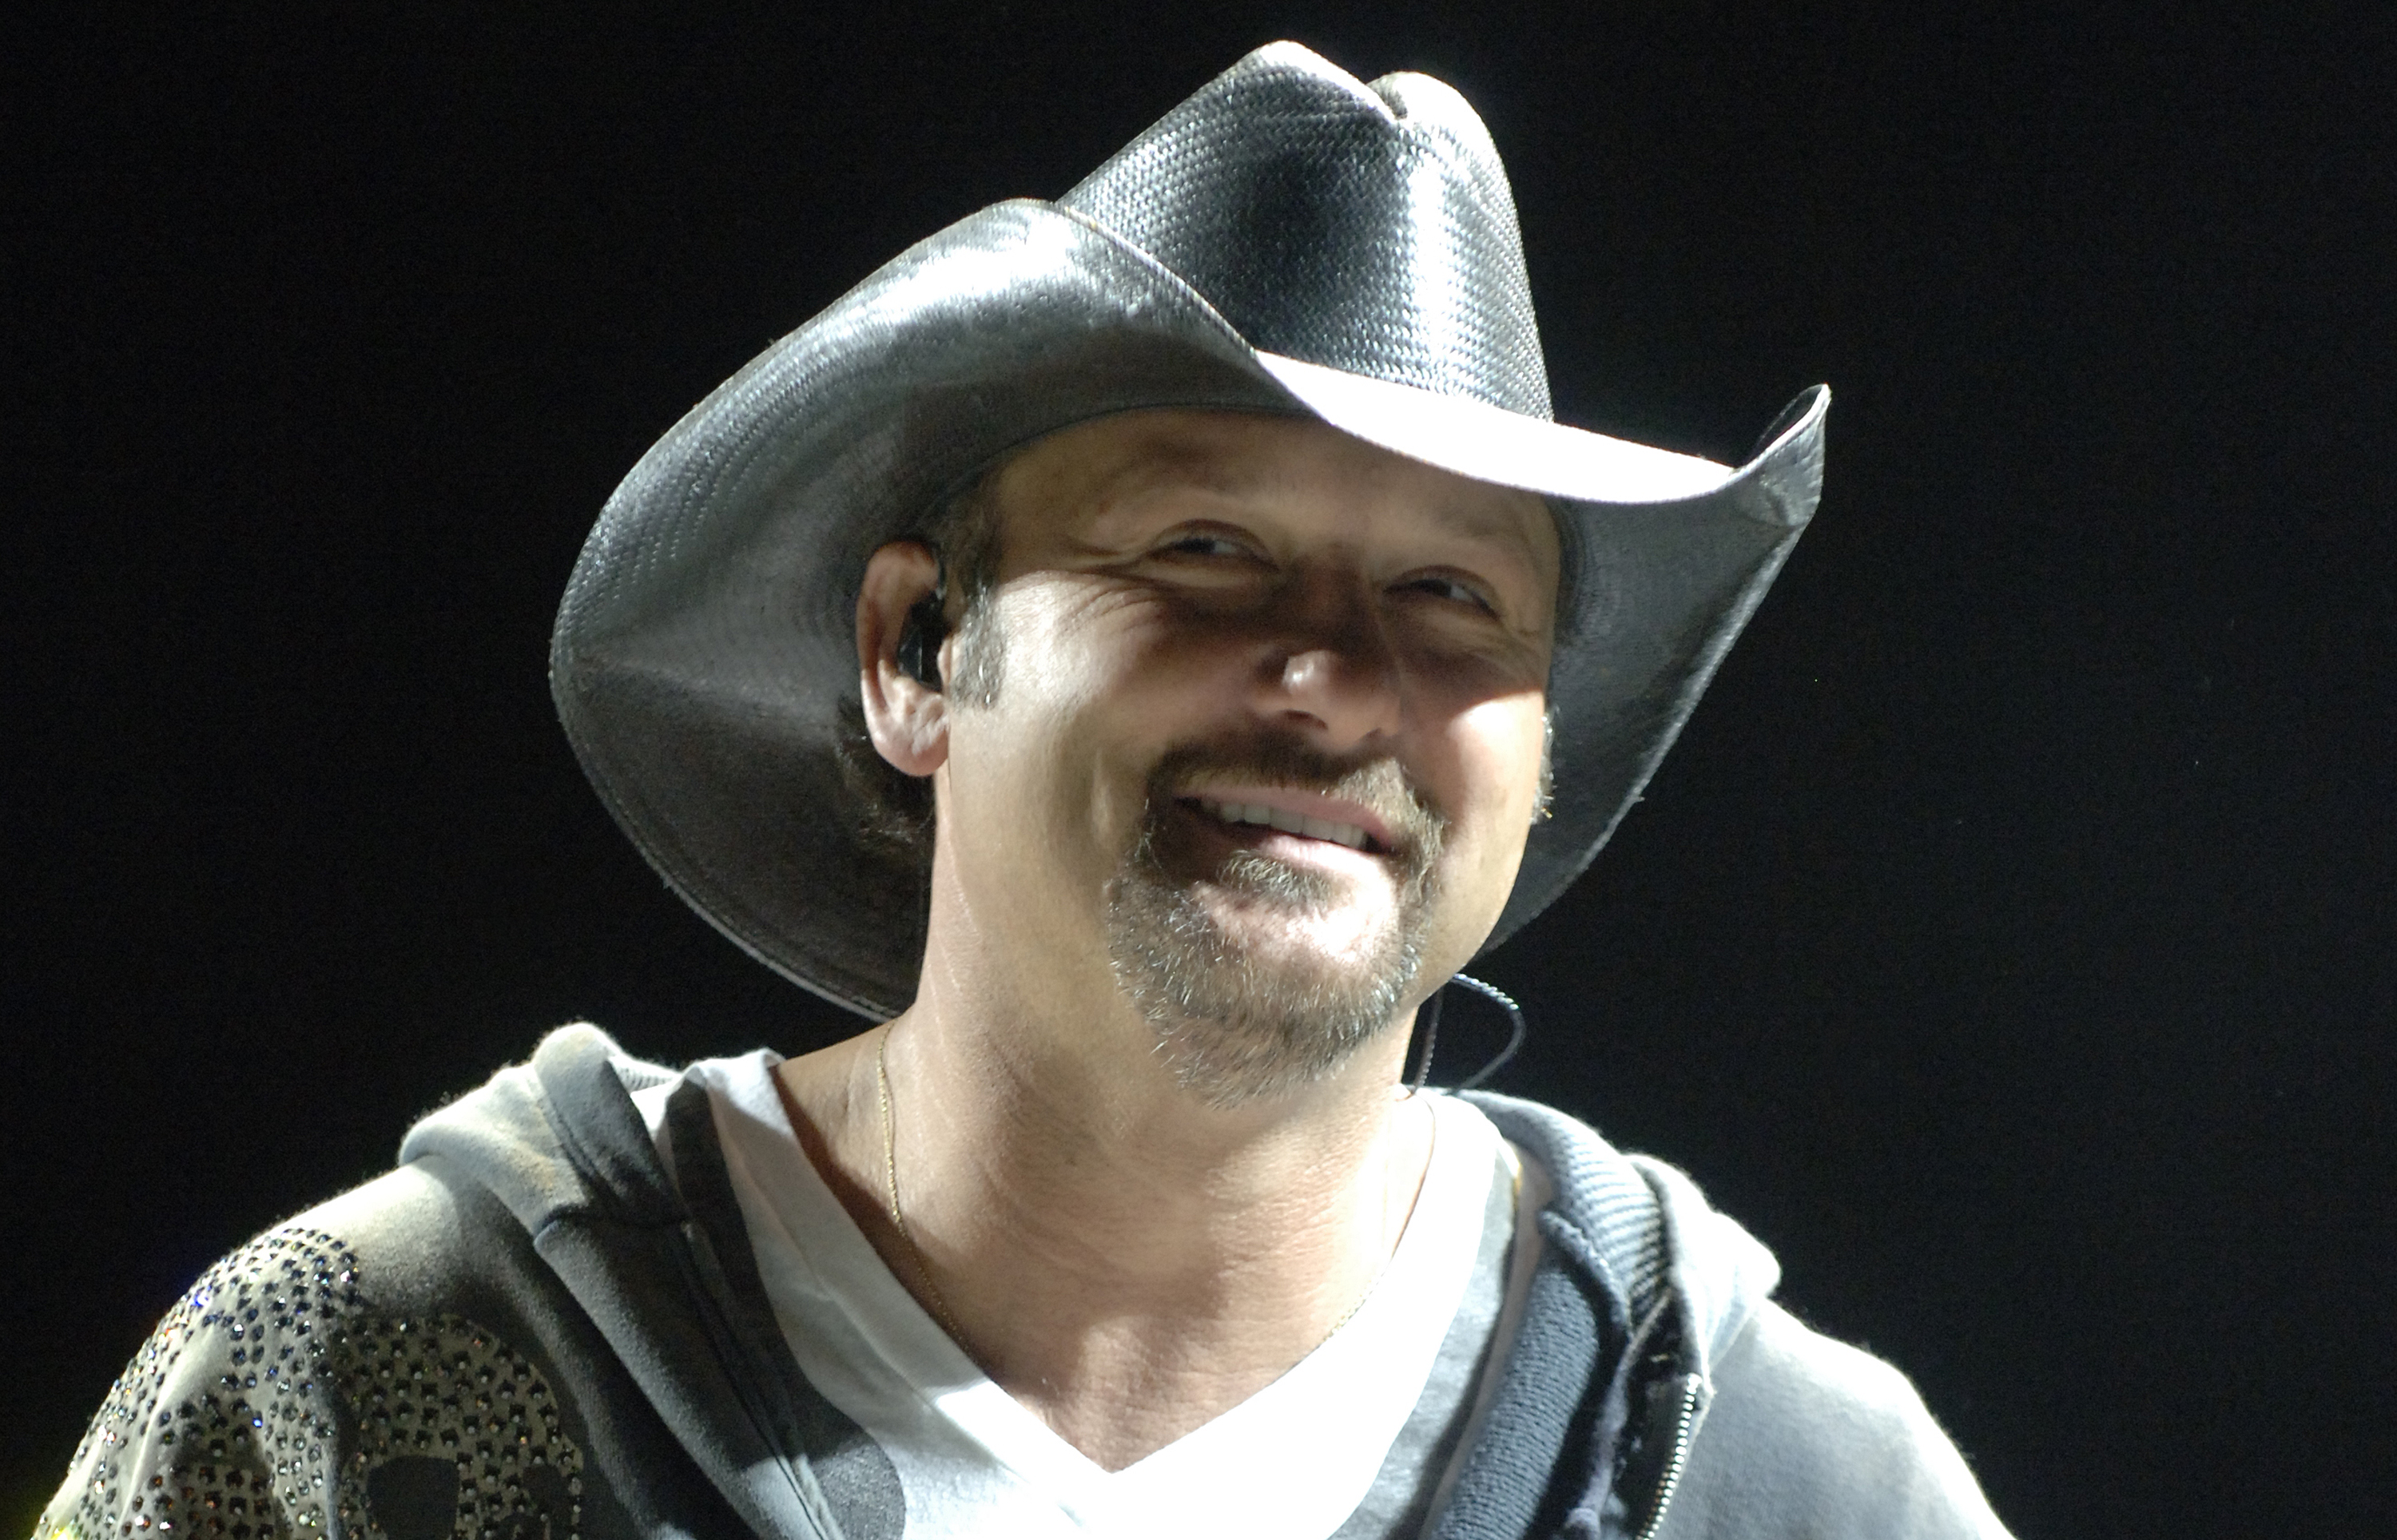 Tim McGraw in California in 2008 | Source: Getty images